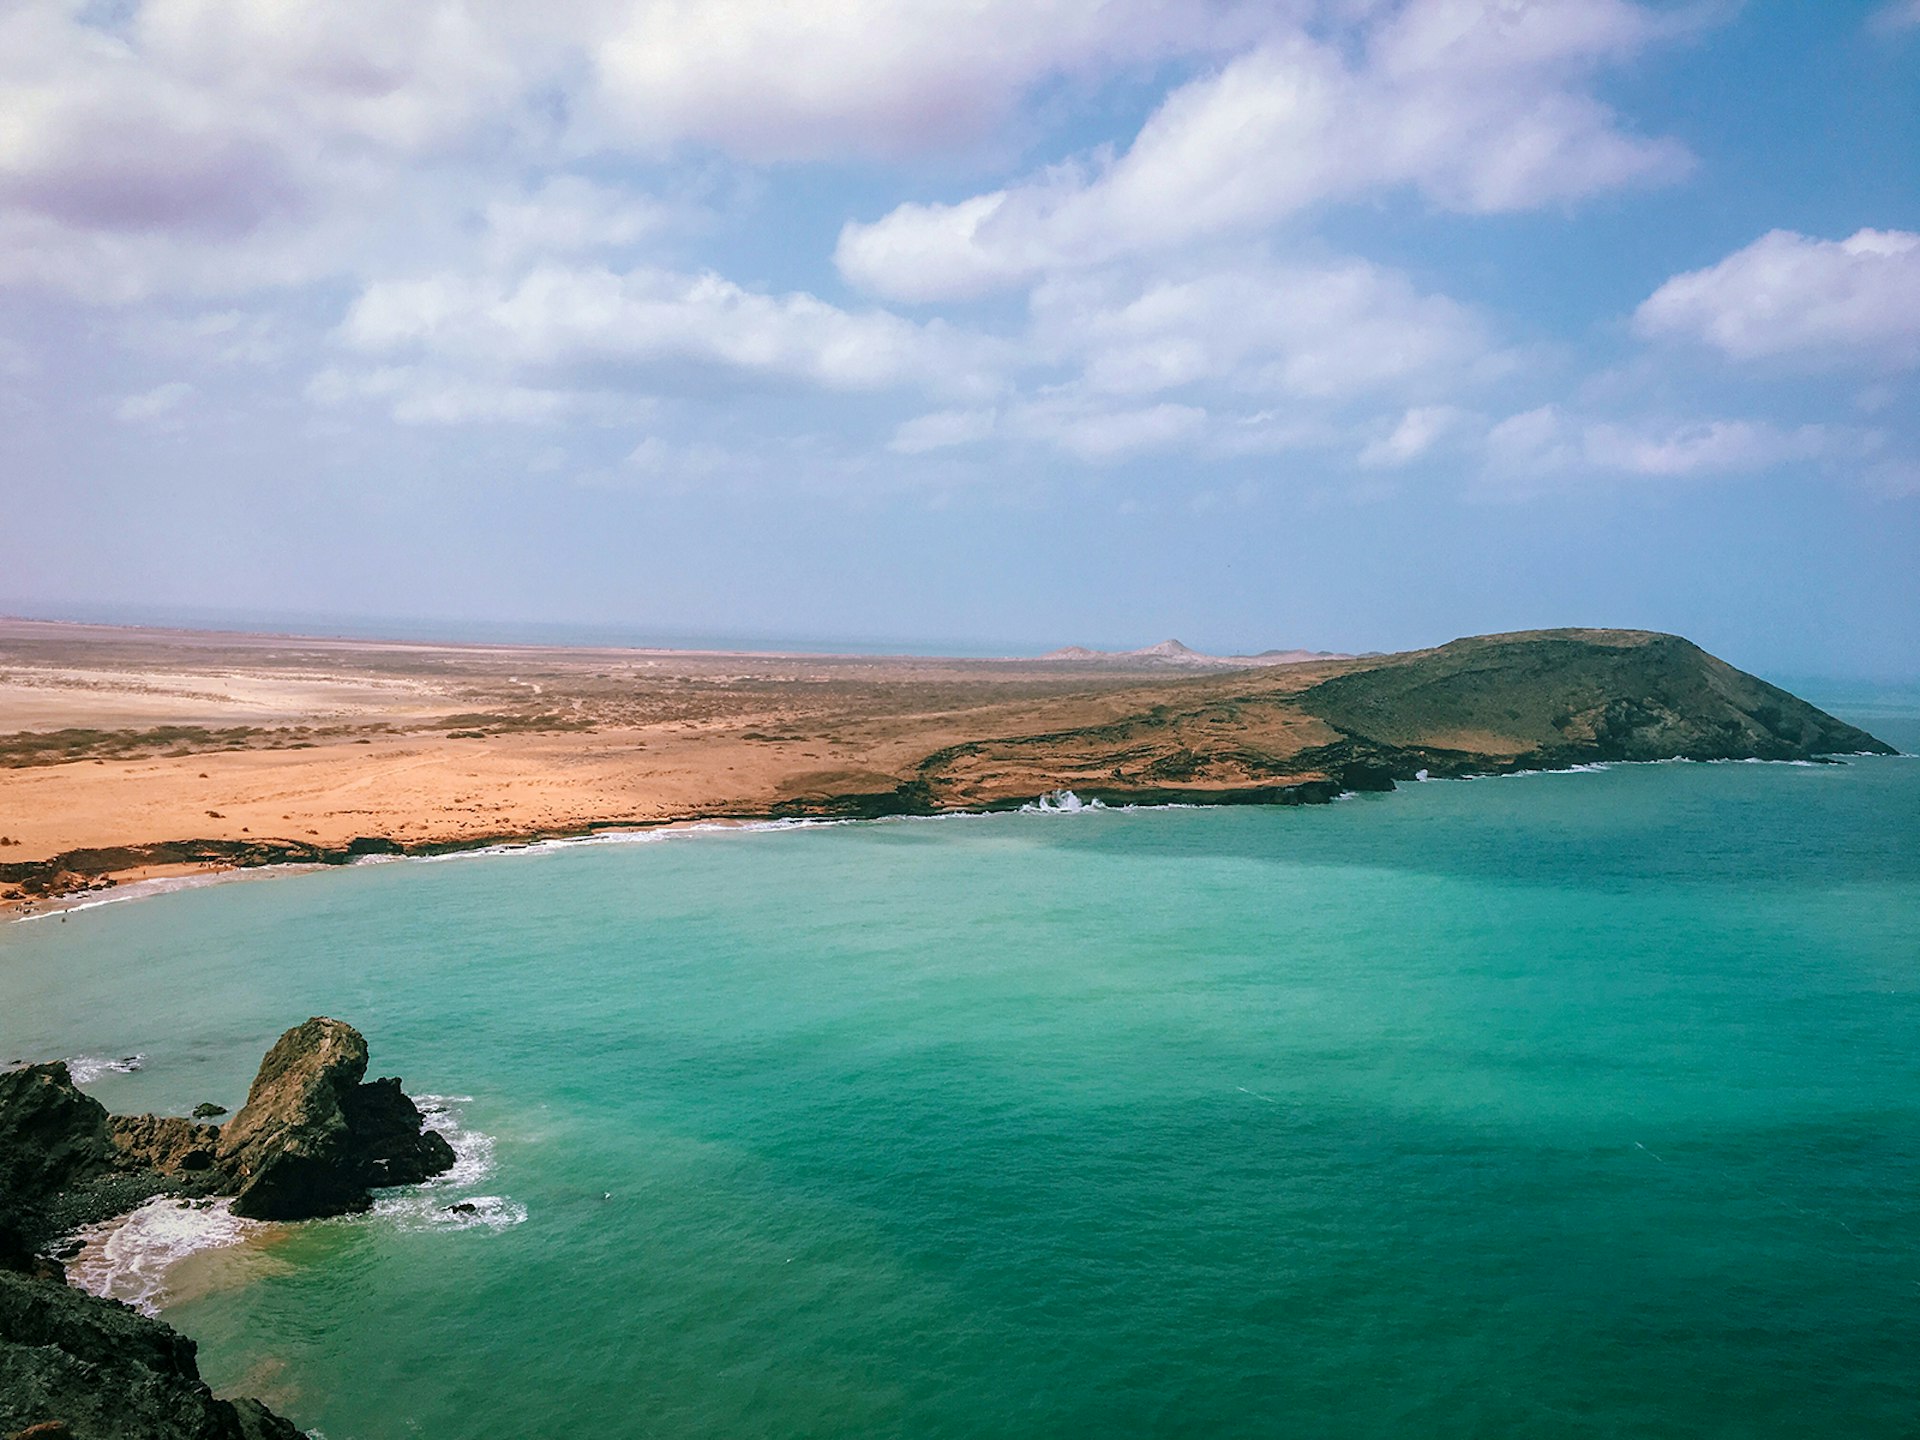 An aerial view of turquoise ocean hitting a desert coastline in La Guajira, Colombia